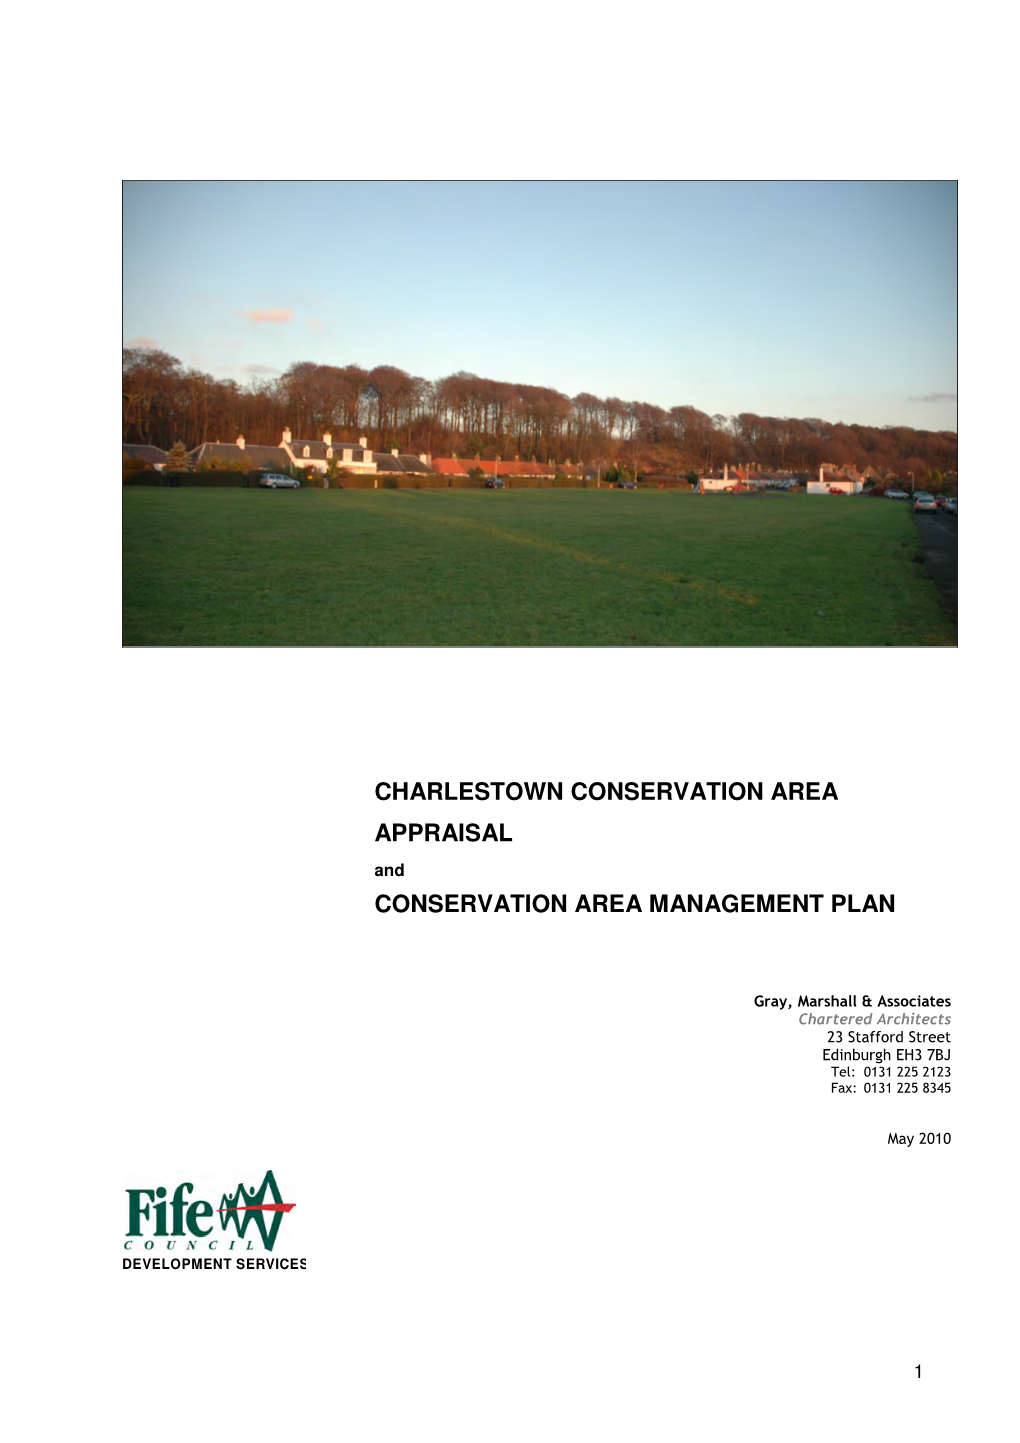 CHARLESTOWN CONSERVATION AREA APPRAISAL and CONSERVATION AREA MANAGEMENT PLAN